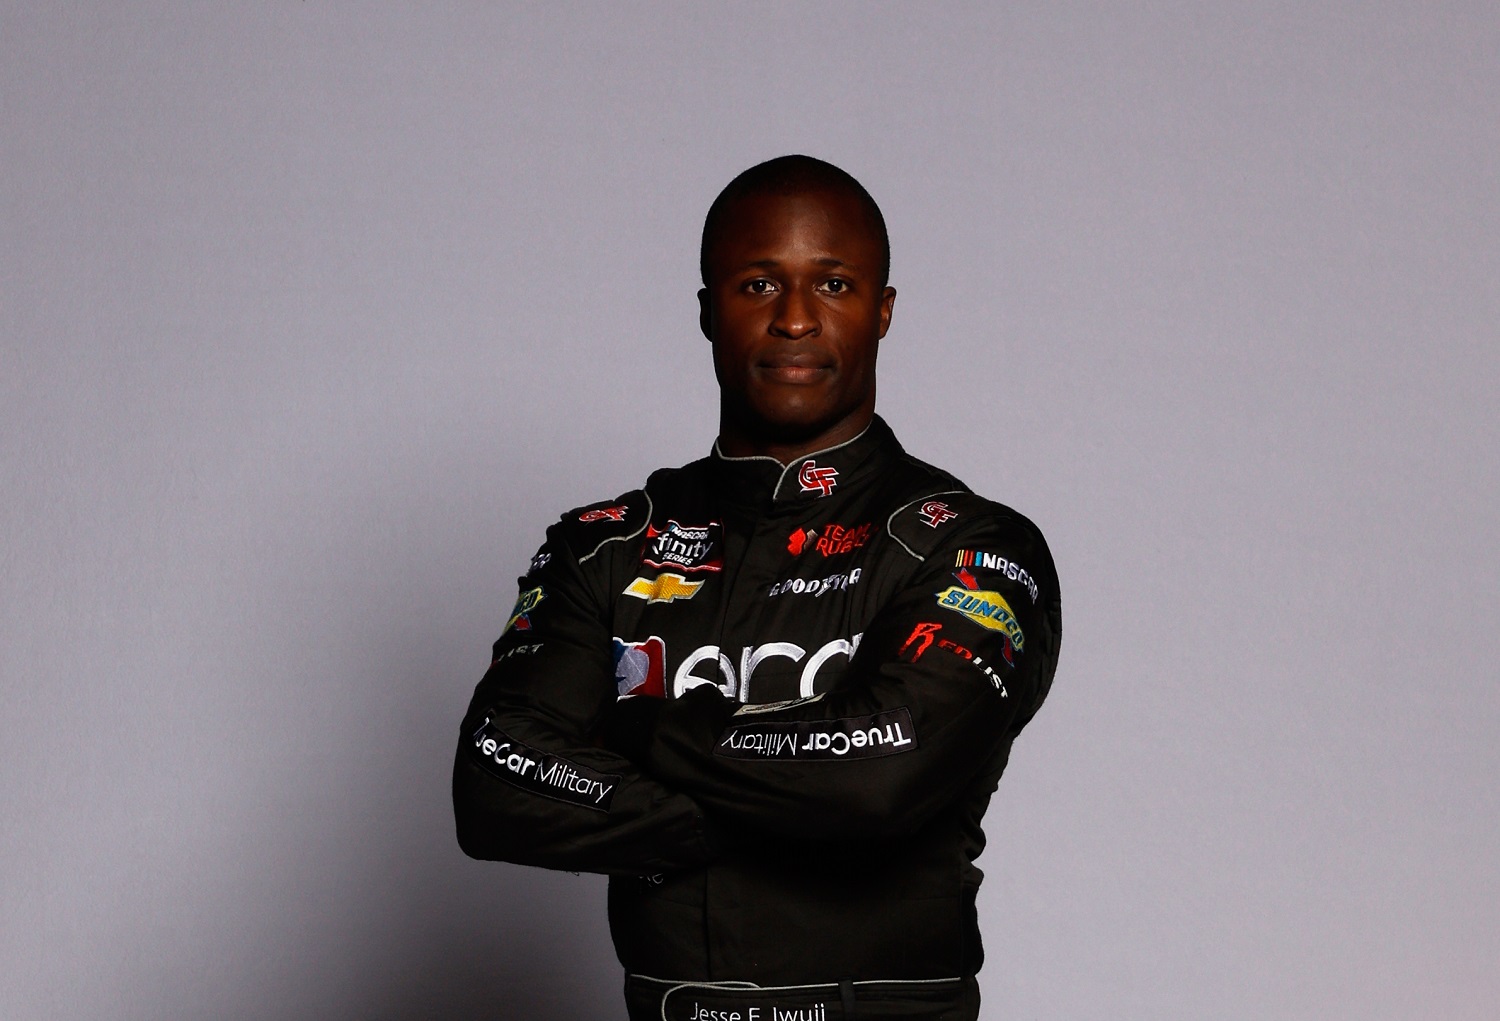 NASCAR Xfinity driver Jesse Iwuji poses for a photo during NASCAR Production Days at Clutch Studios on Jan. 18, 2022, in Concord, North Carolina.